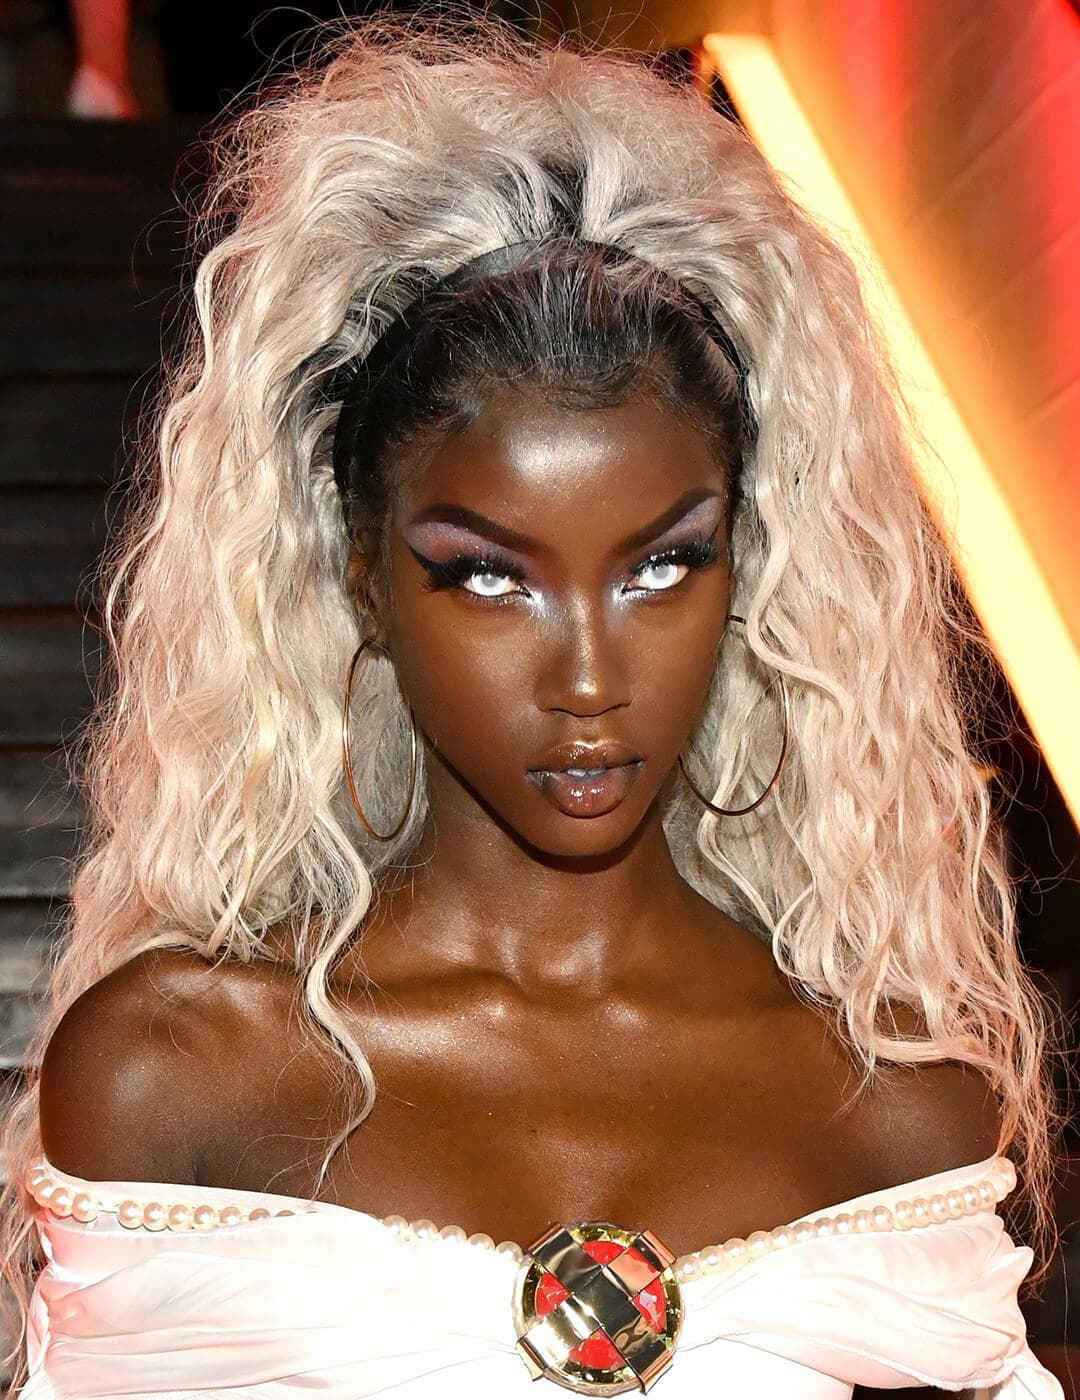 Anok Yai dressed and made up as Storm from X-Men for Halloween